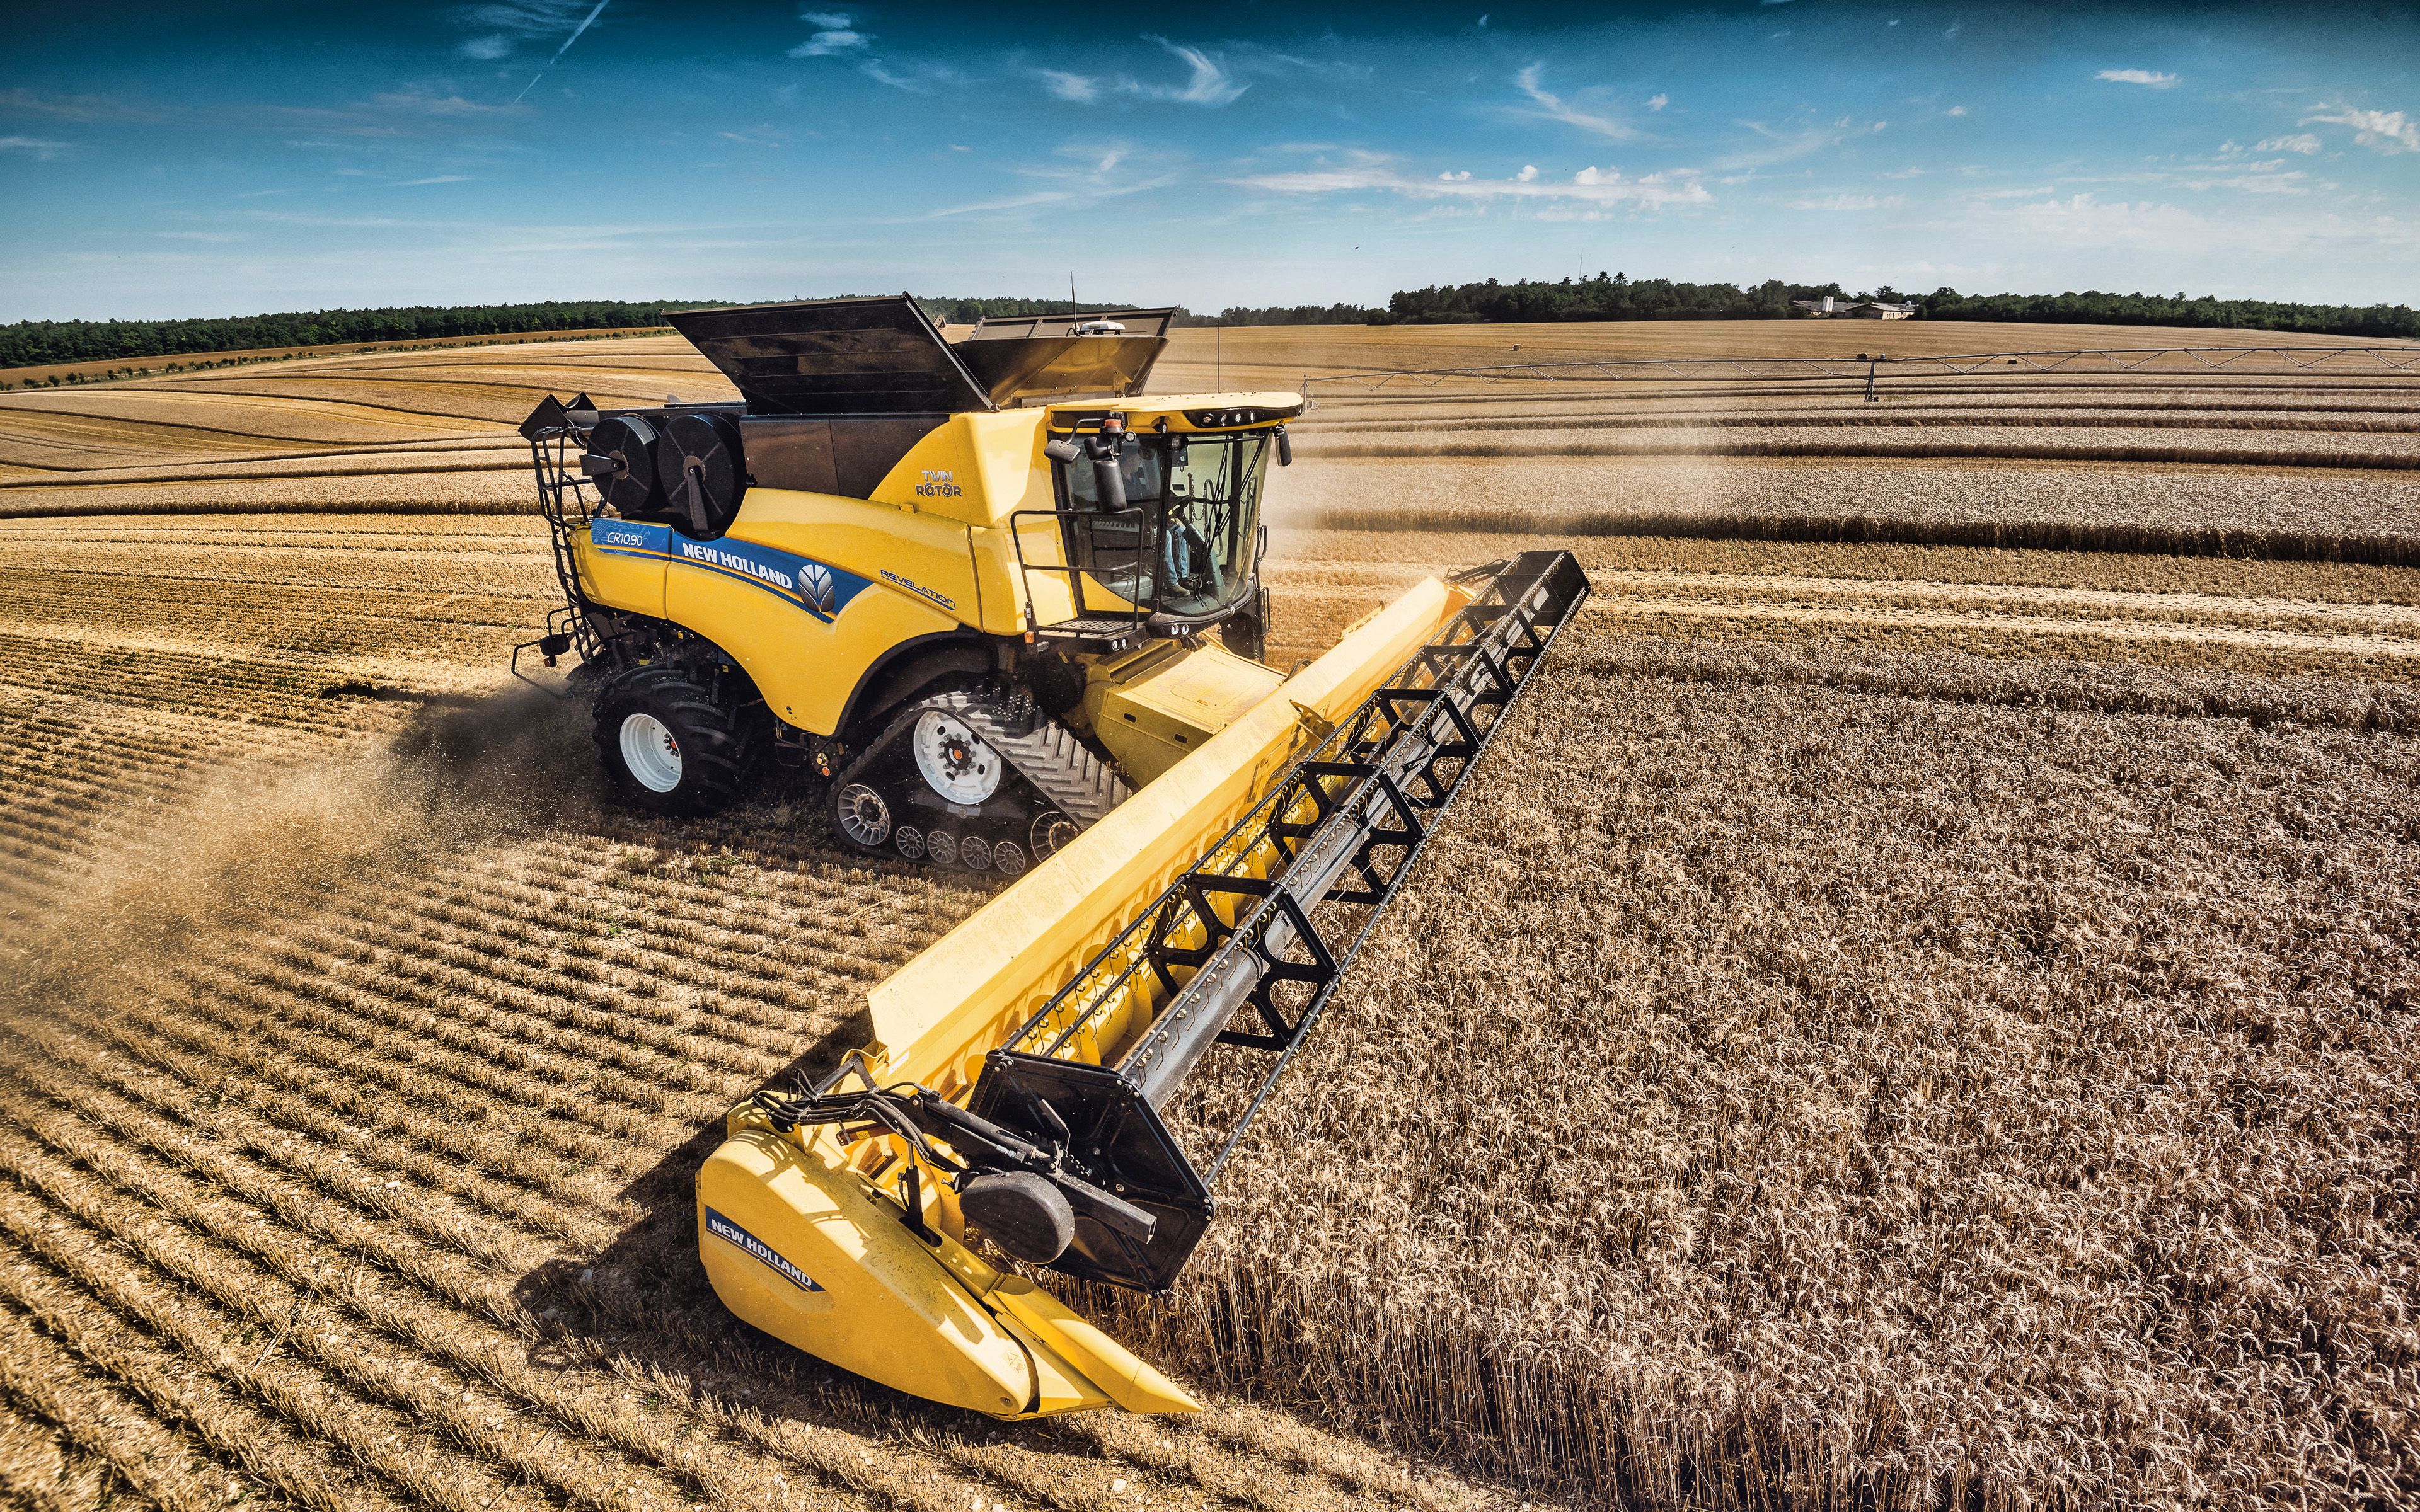 Download Wallpaper 4k, New Holland CR Wheat Harvest, Close Up, 2019 Combines, New Holland Agriculture CR Series, Agricultural Machinery, HDR, Grain Harvesting, Combine Harvester, Combine In The Field, Agriculture, New Holland Agriculture For